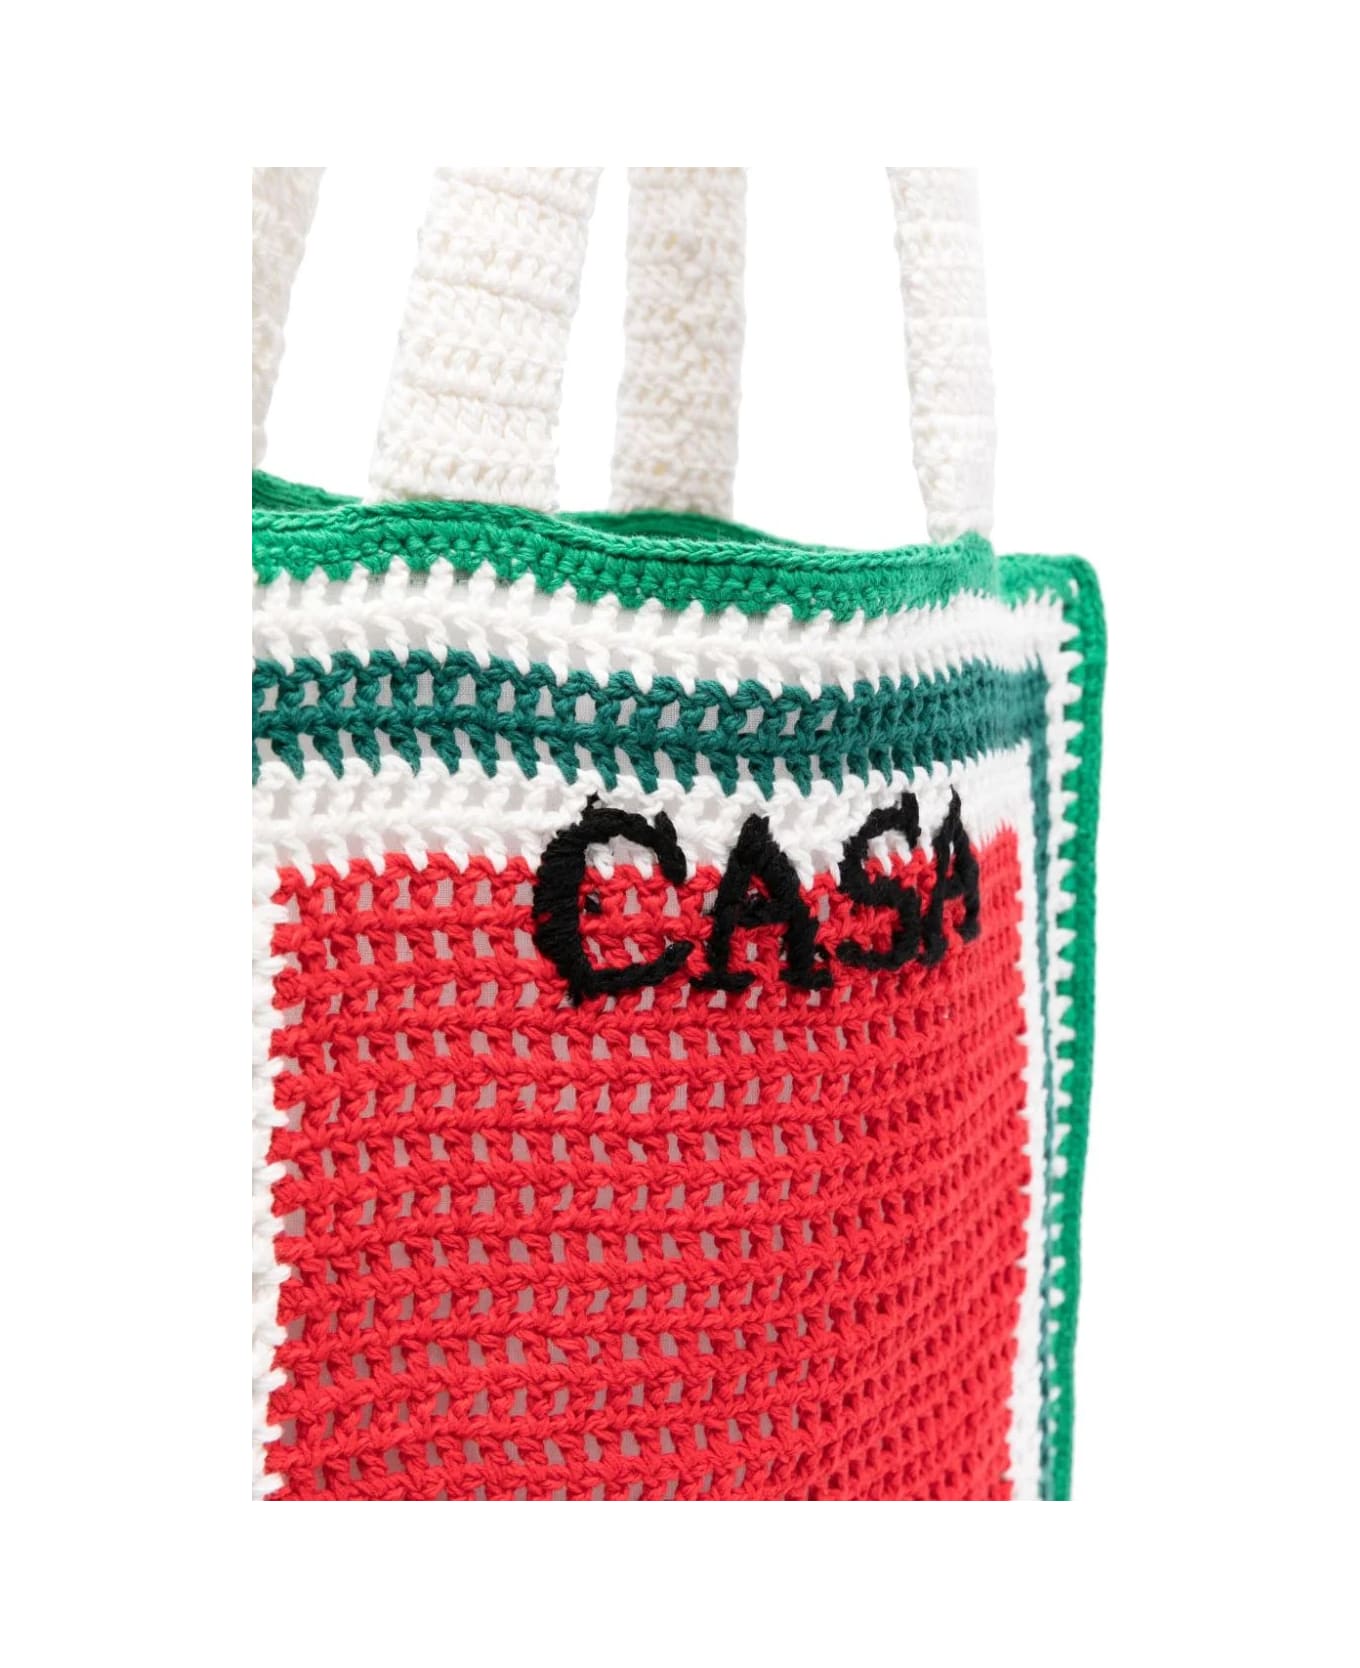 Casablanca Crocheted Atlantis Tote Bag In Green, Red And White - Red